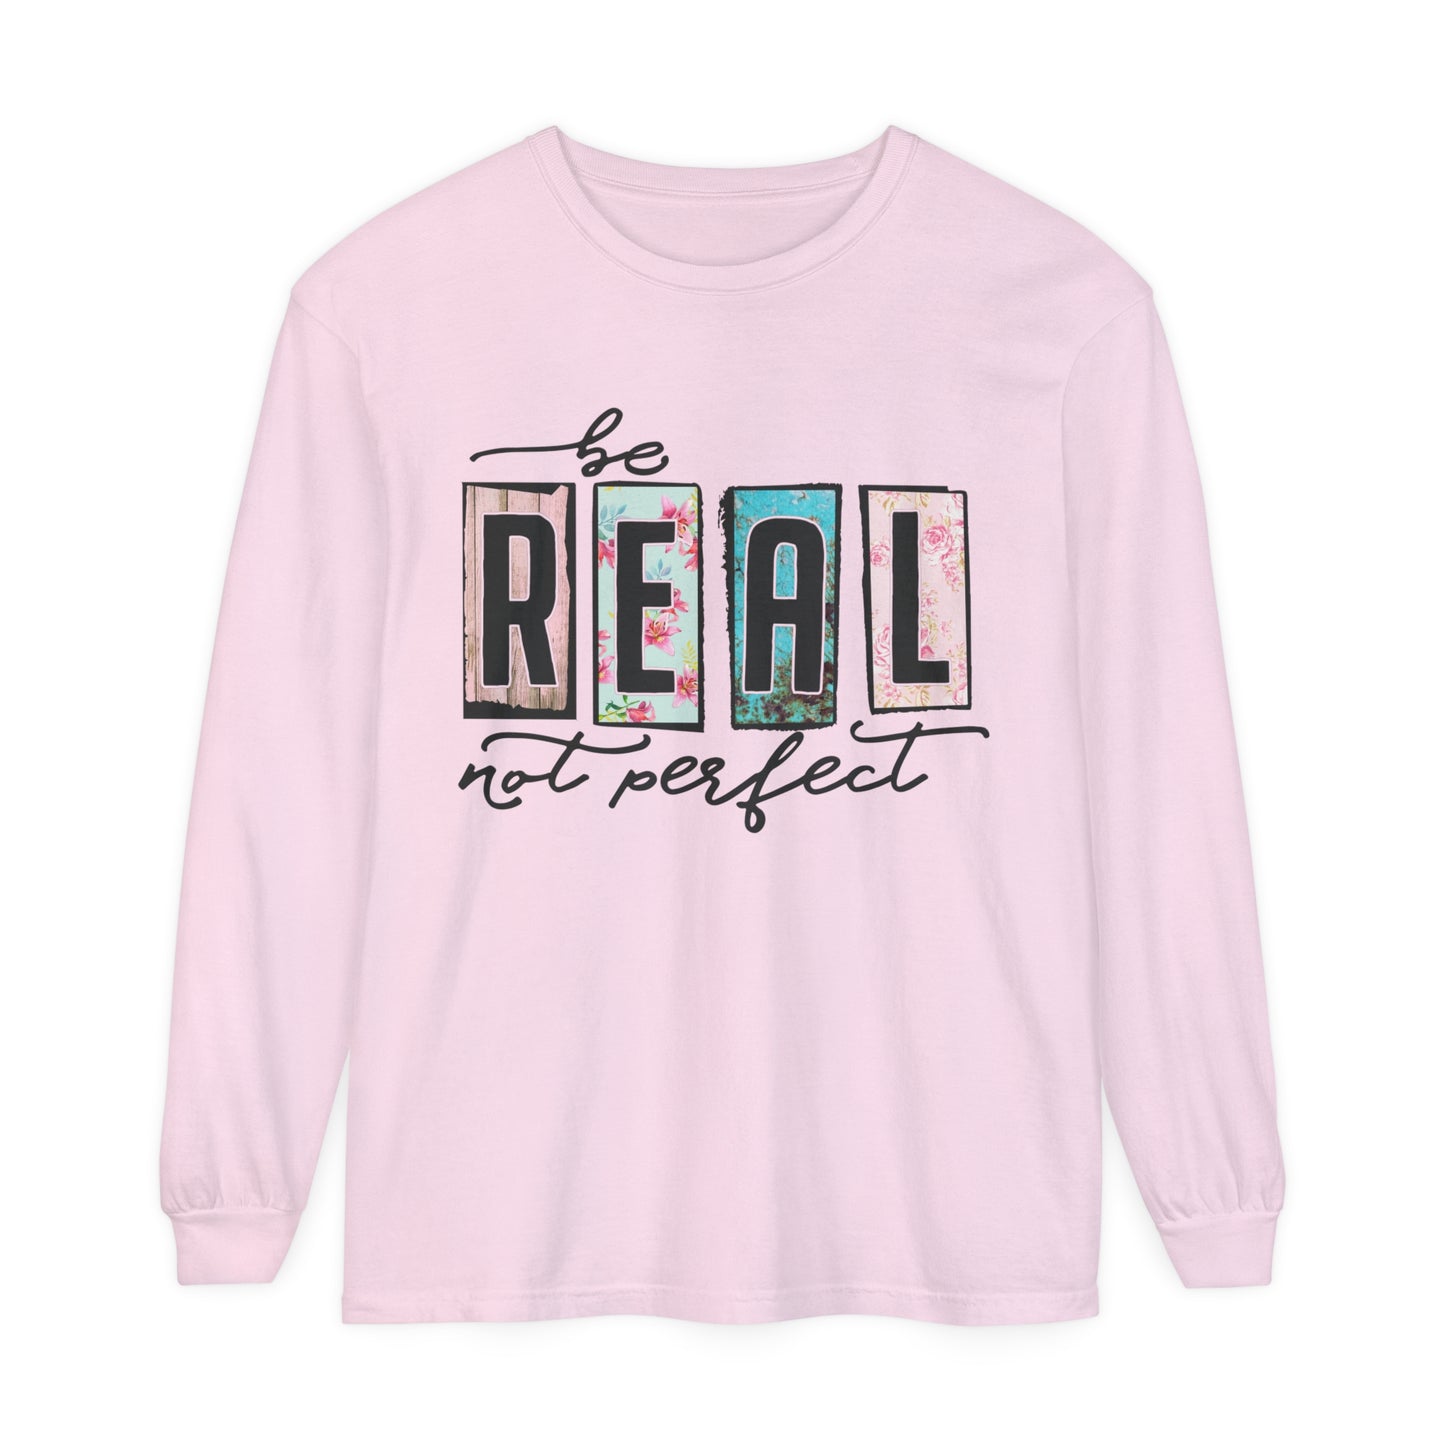 Be Real Not Perfect Women's Loose Long Sleeve T-Shirt